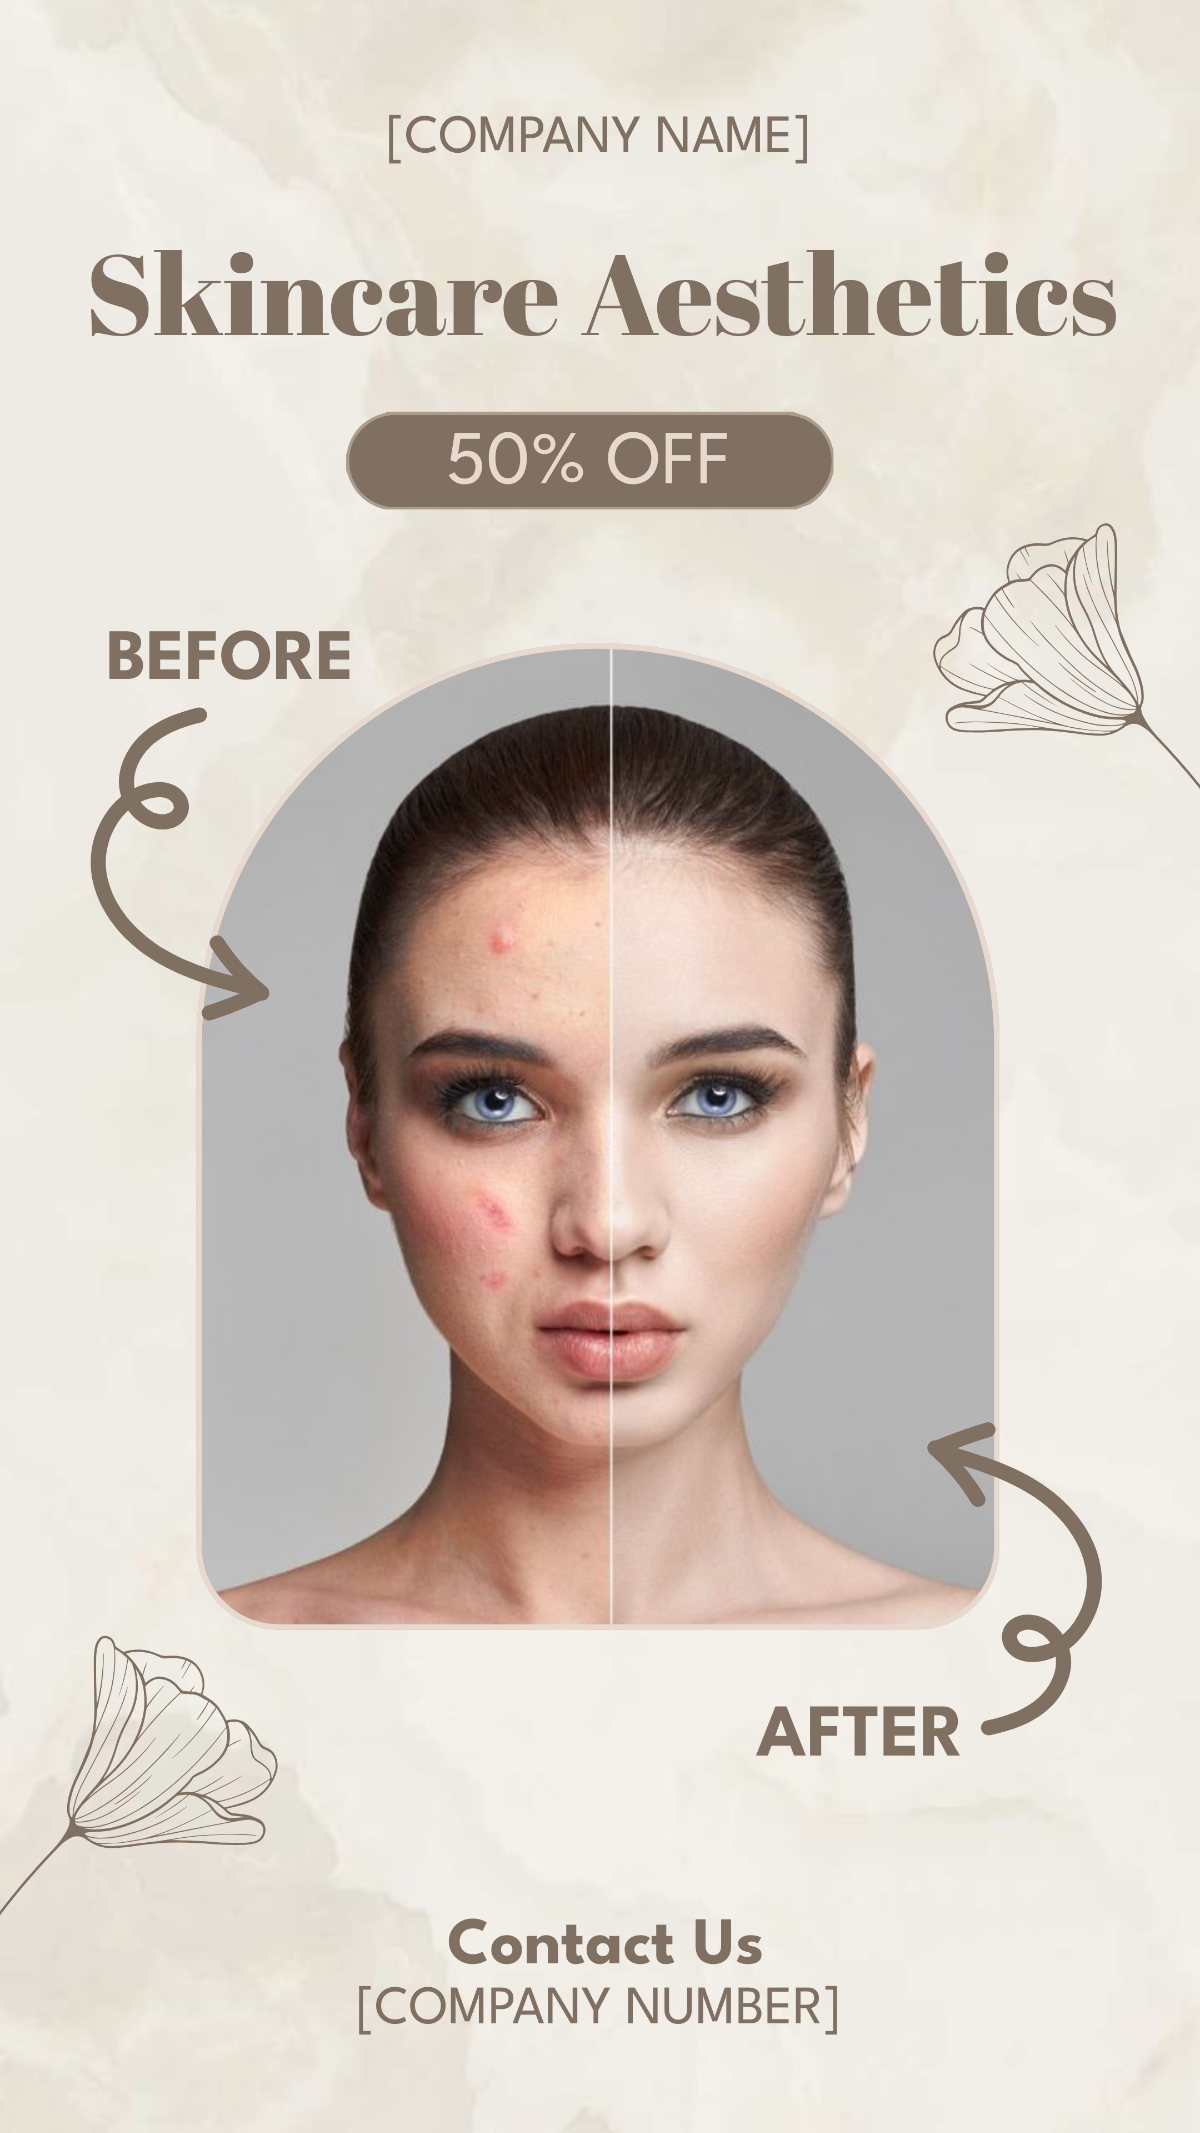 Skincare Before and After Promotion Instagram Story